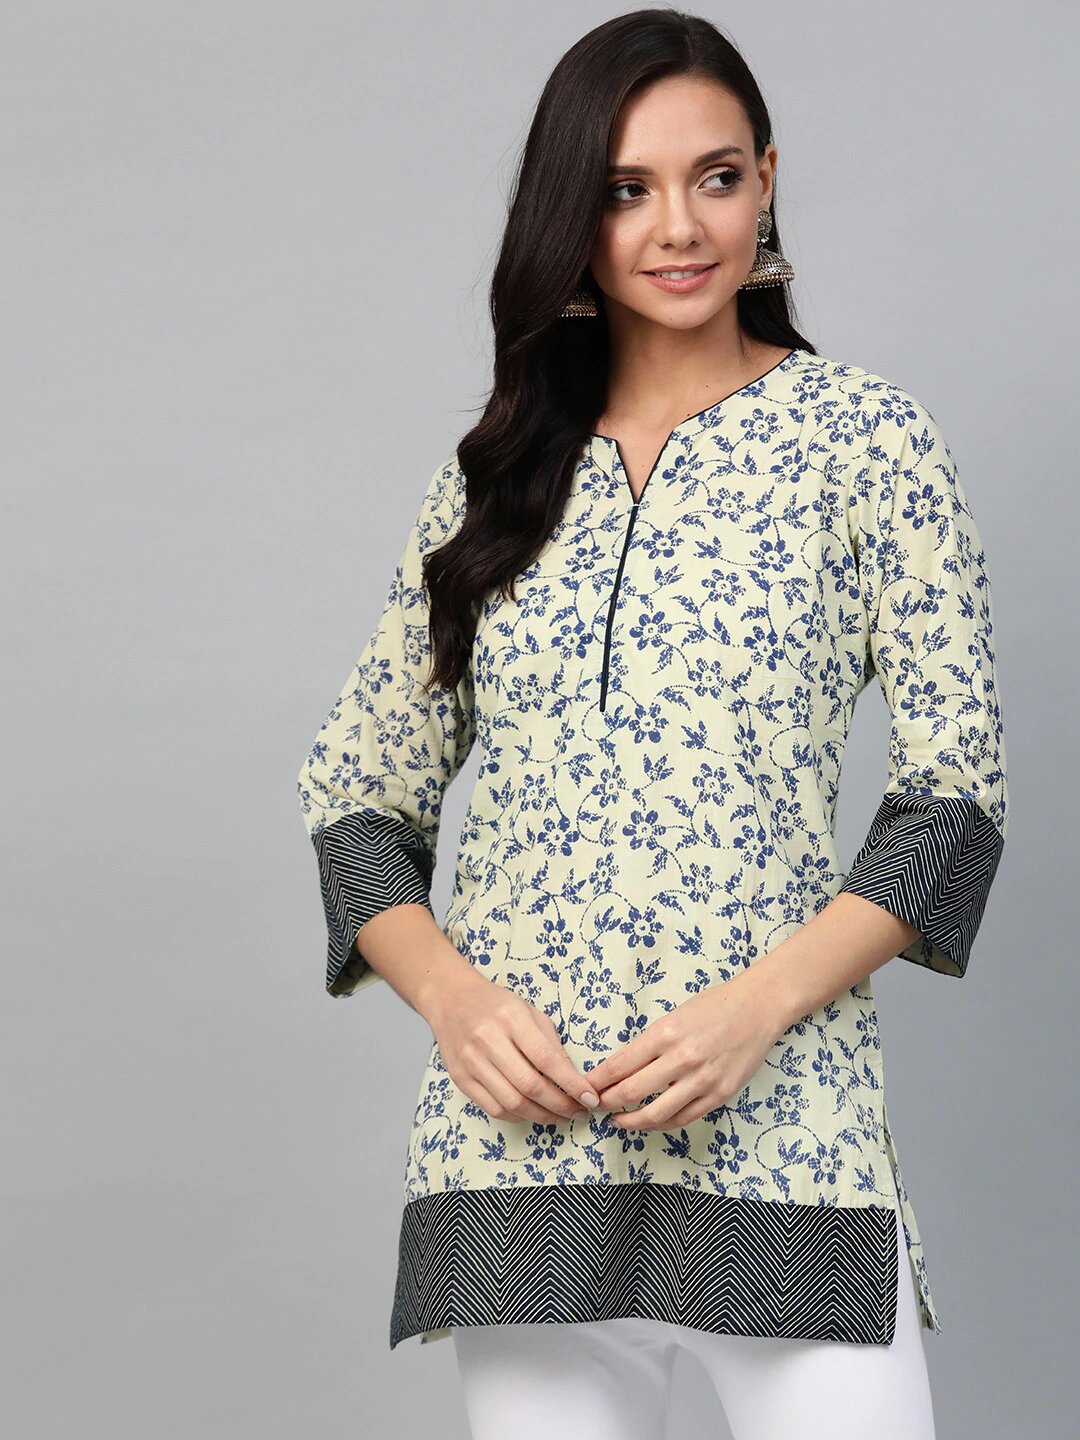 Beige & Black Floral Printed Cotton Tunic